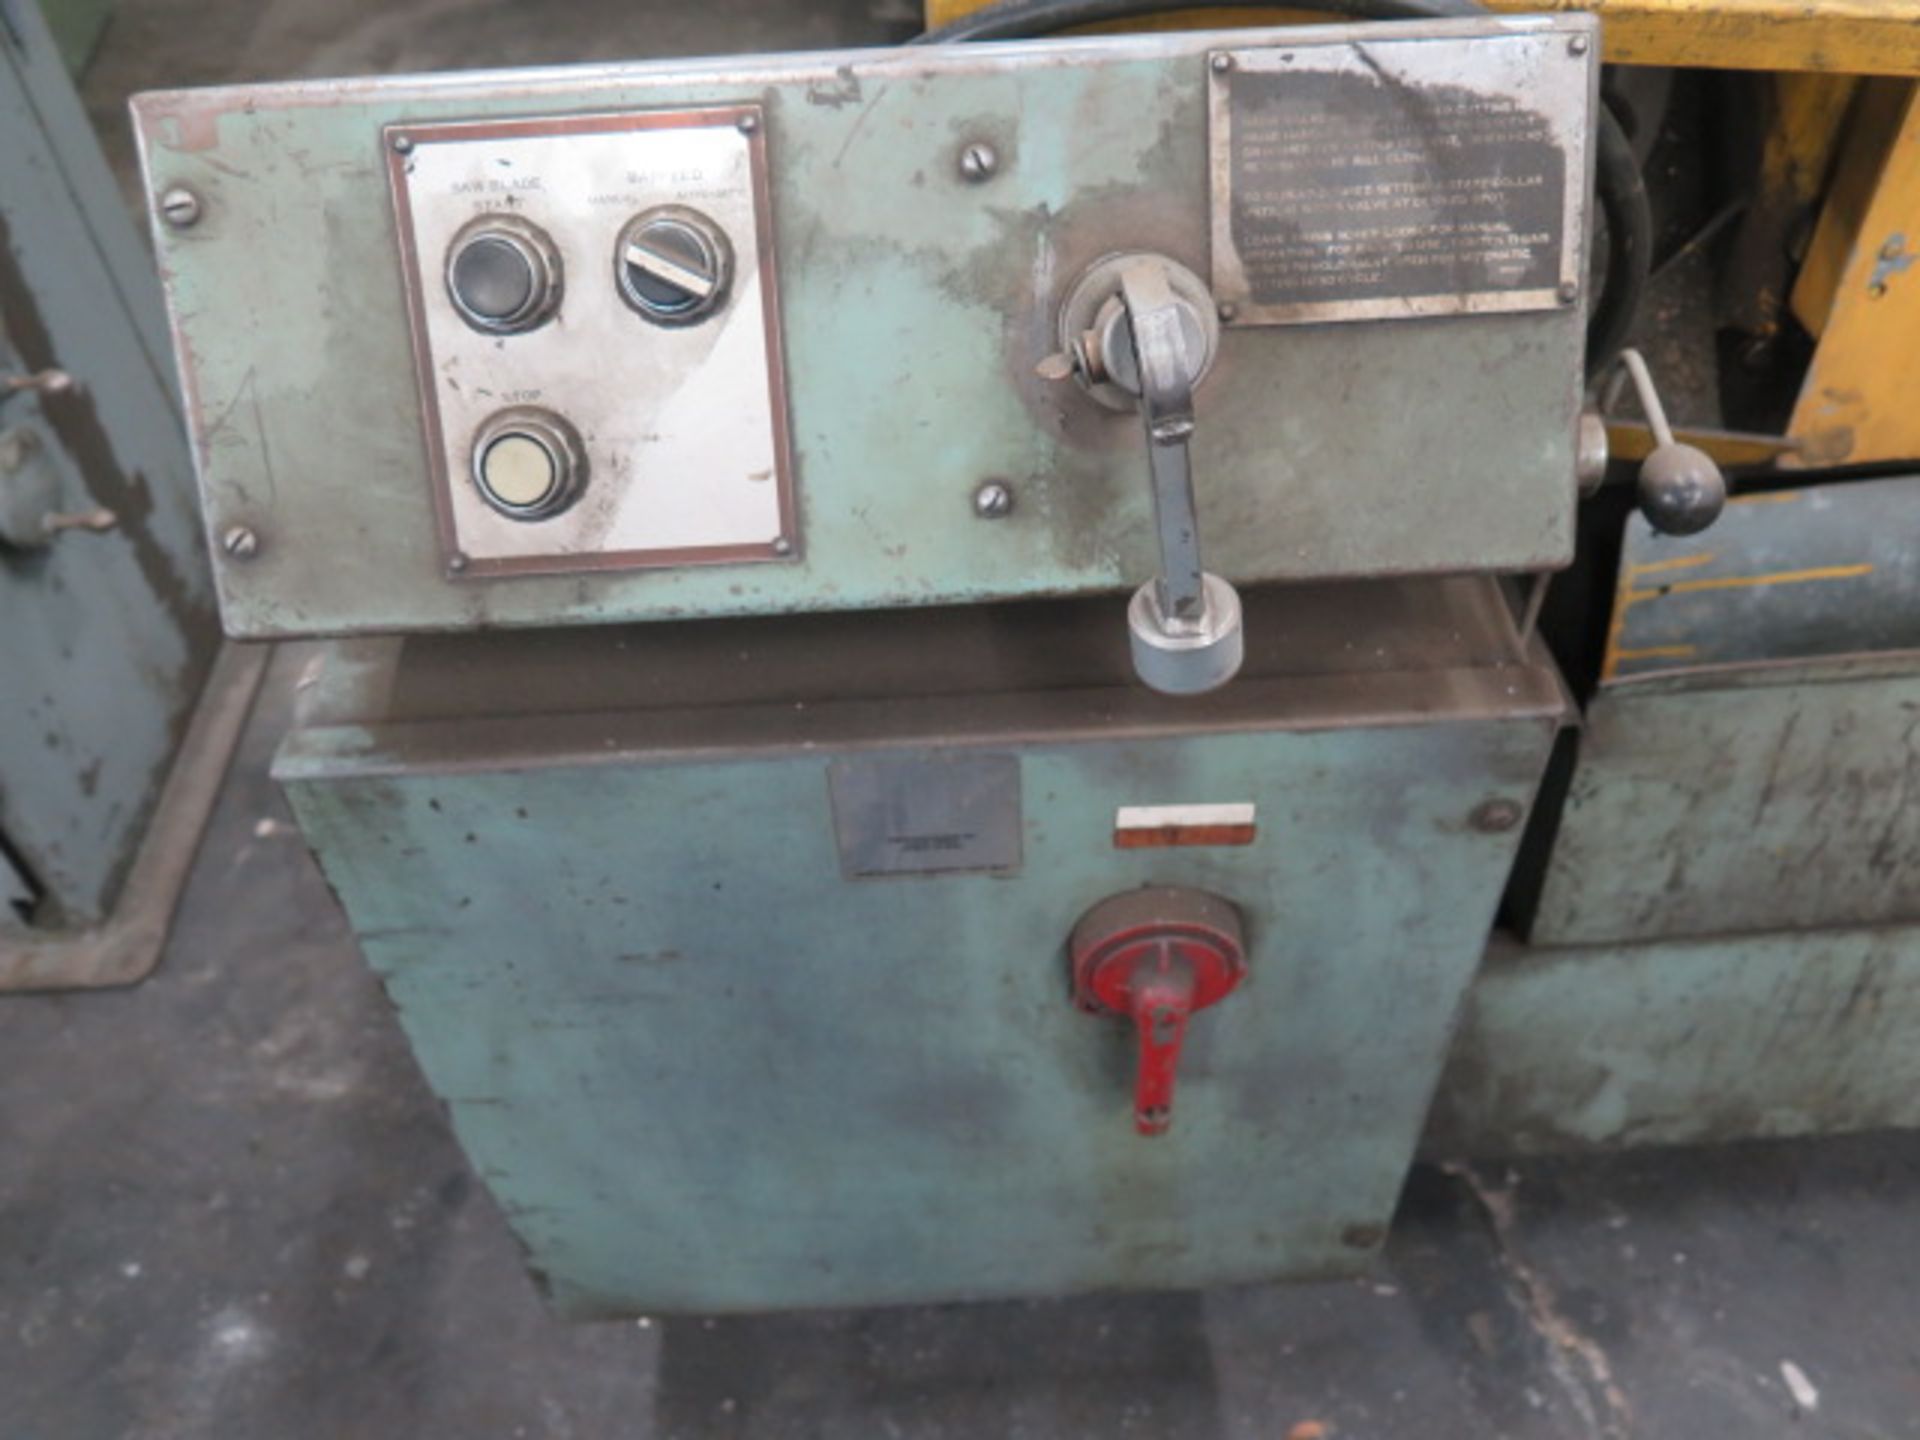 W.F.Wells mdl. W-9 9” Horizontal Band Saw w/ Manual Clamping (SOLD AS-IS - NO WARRANTY) - Image 5 of 6